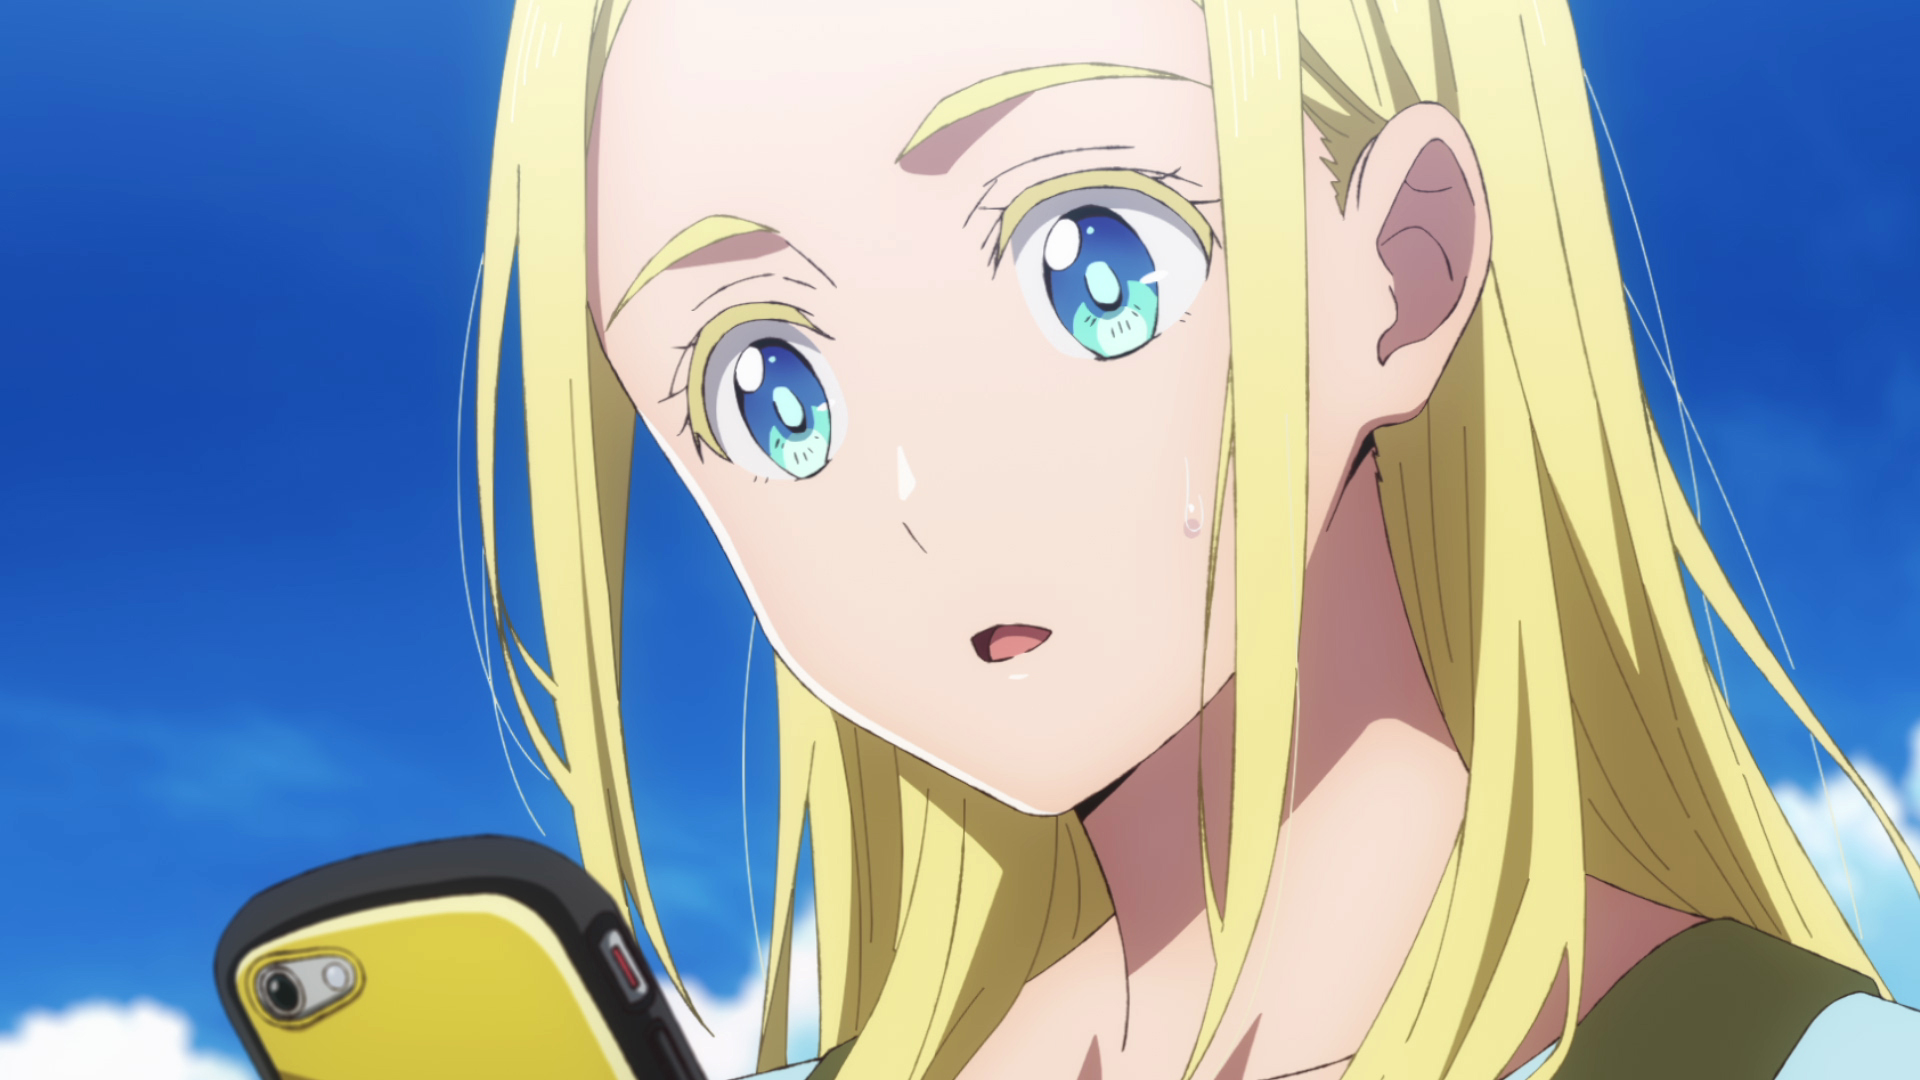 Summer Time Rendering Reveals Episode 11 Preview - Anime Corner